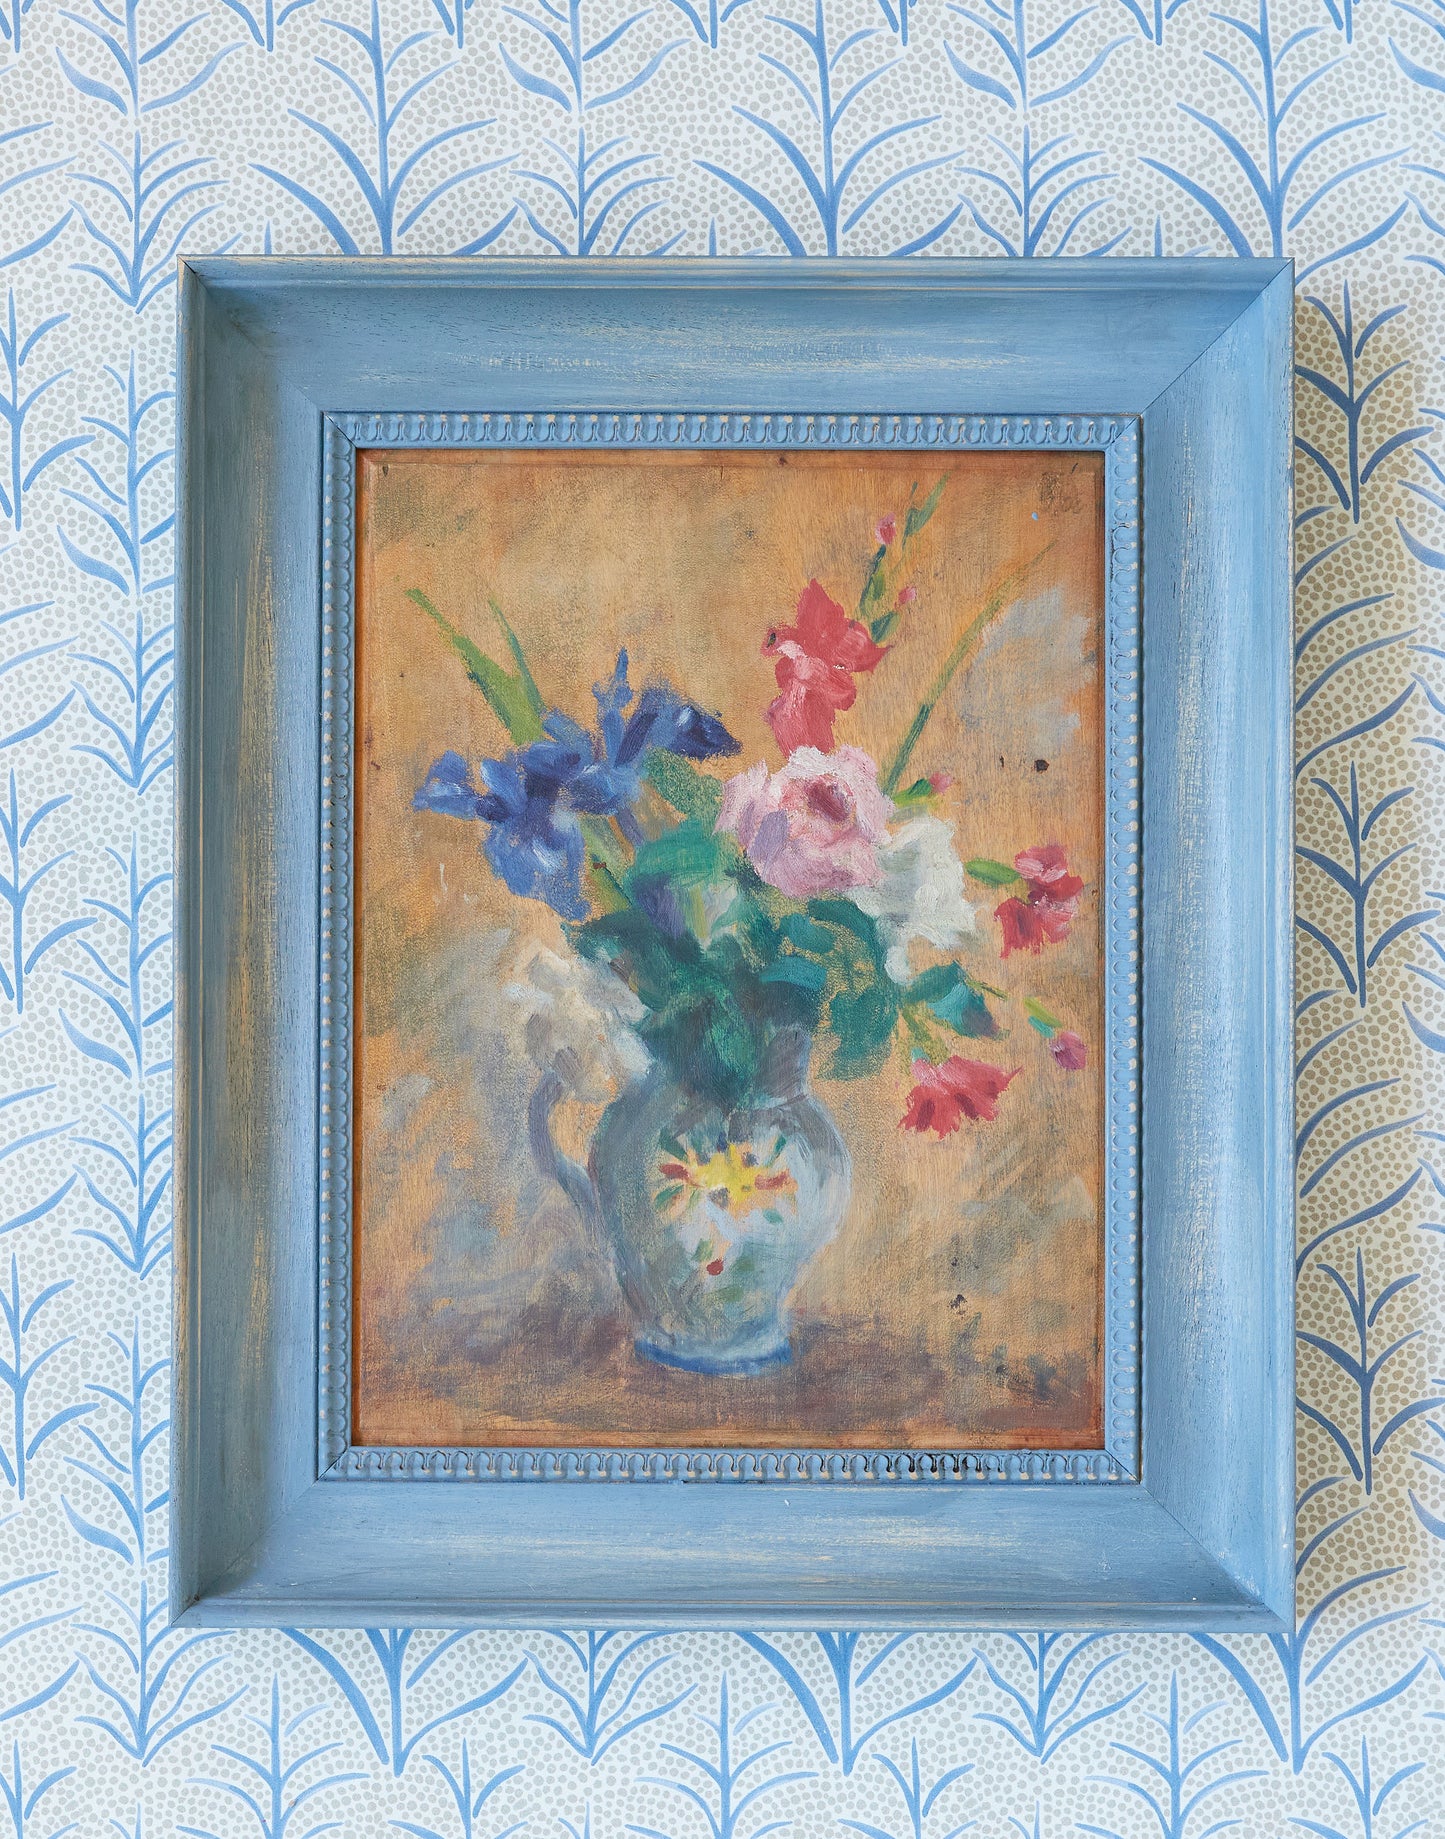 A 20th Century Floral Still Life Oil on Board by A Barres